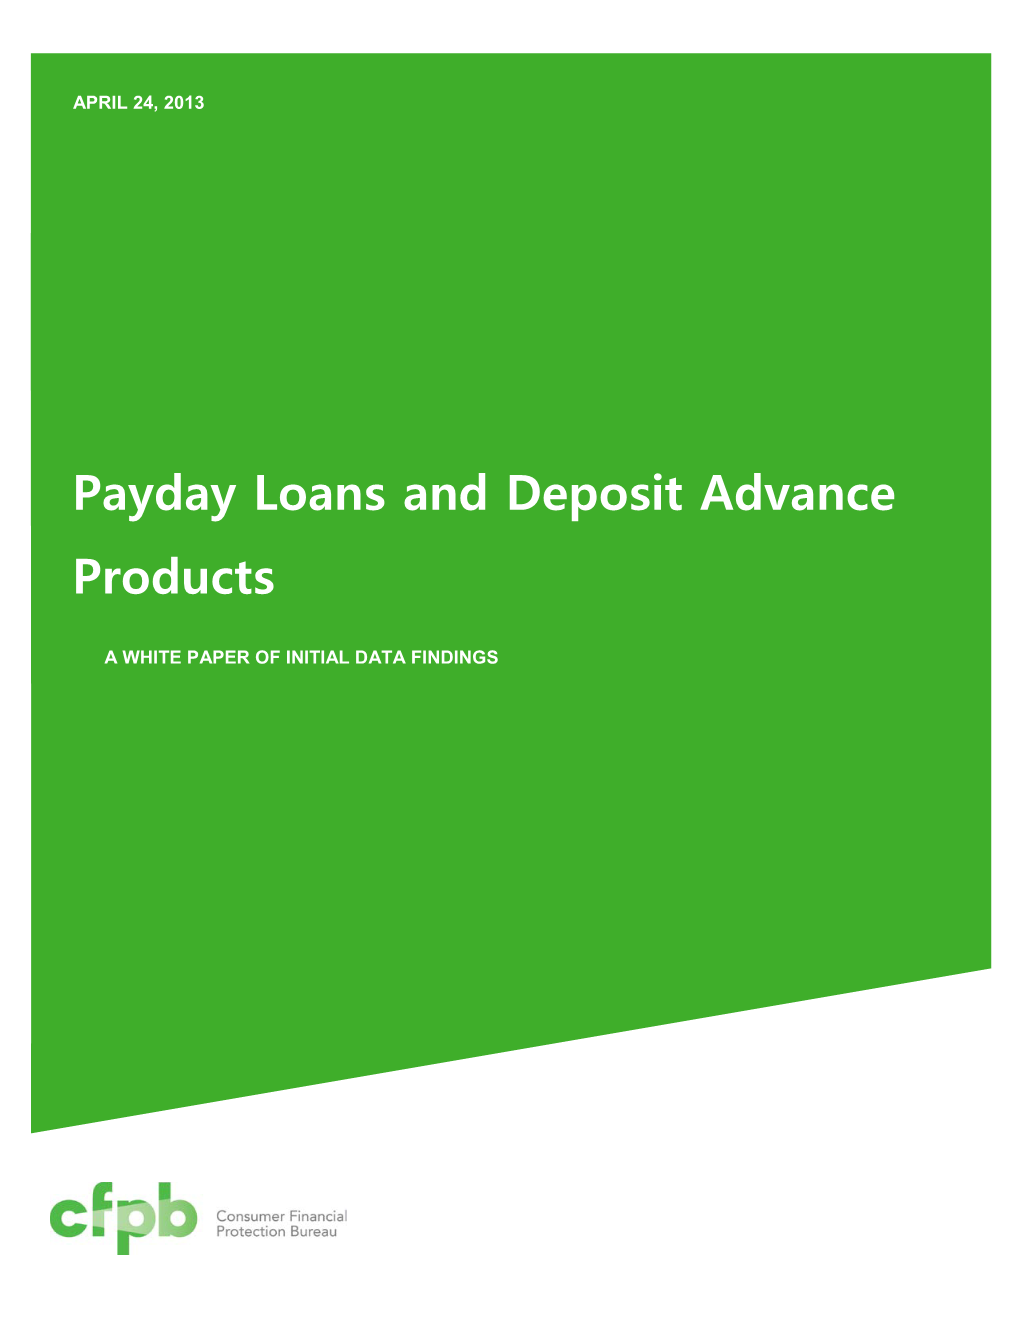 White Paper on Payday Loans and Deposit Advance Products